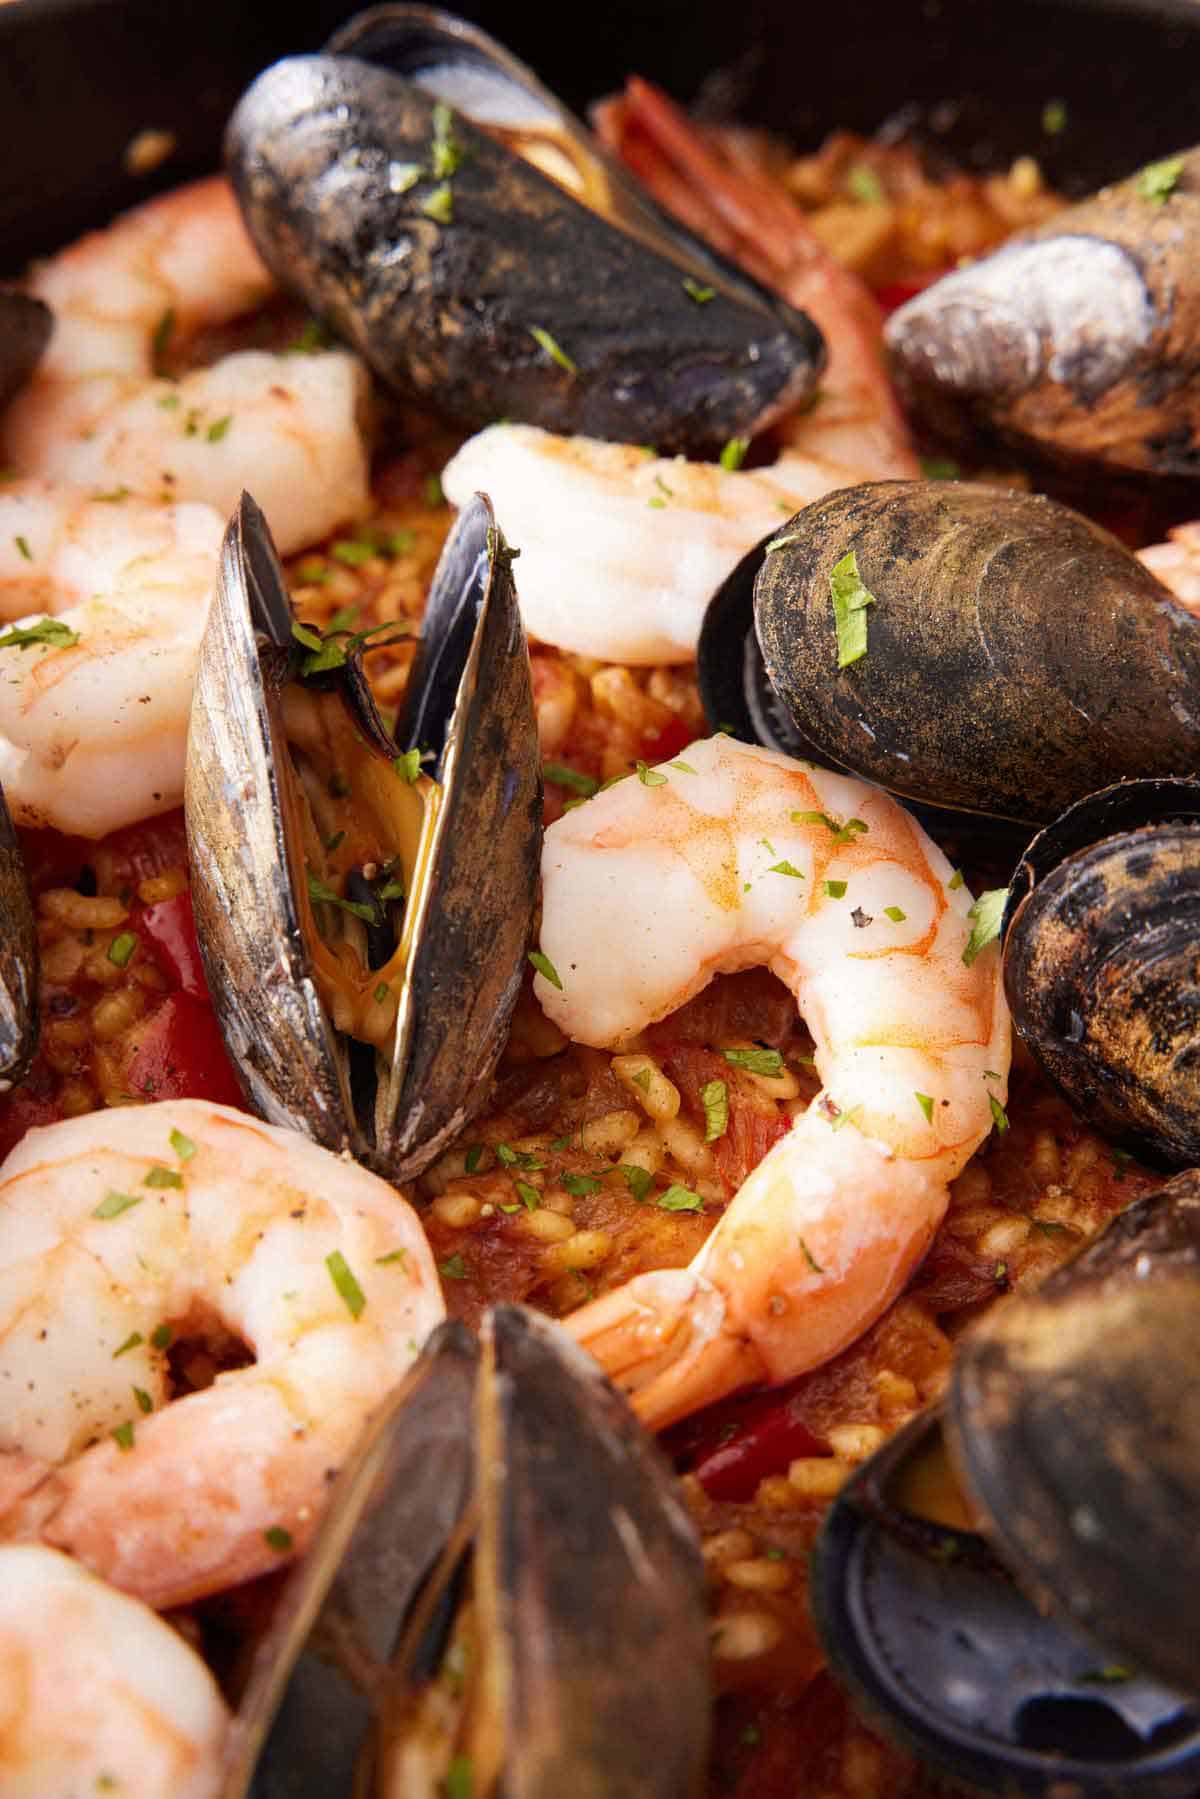 A close up view of paella in a skillet, highlighting the shrimp and mussels.